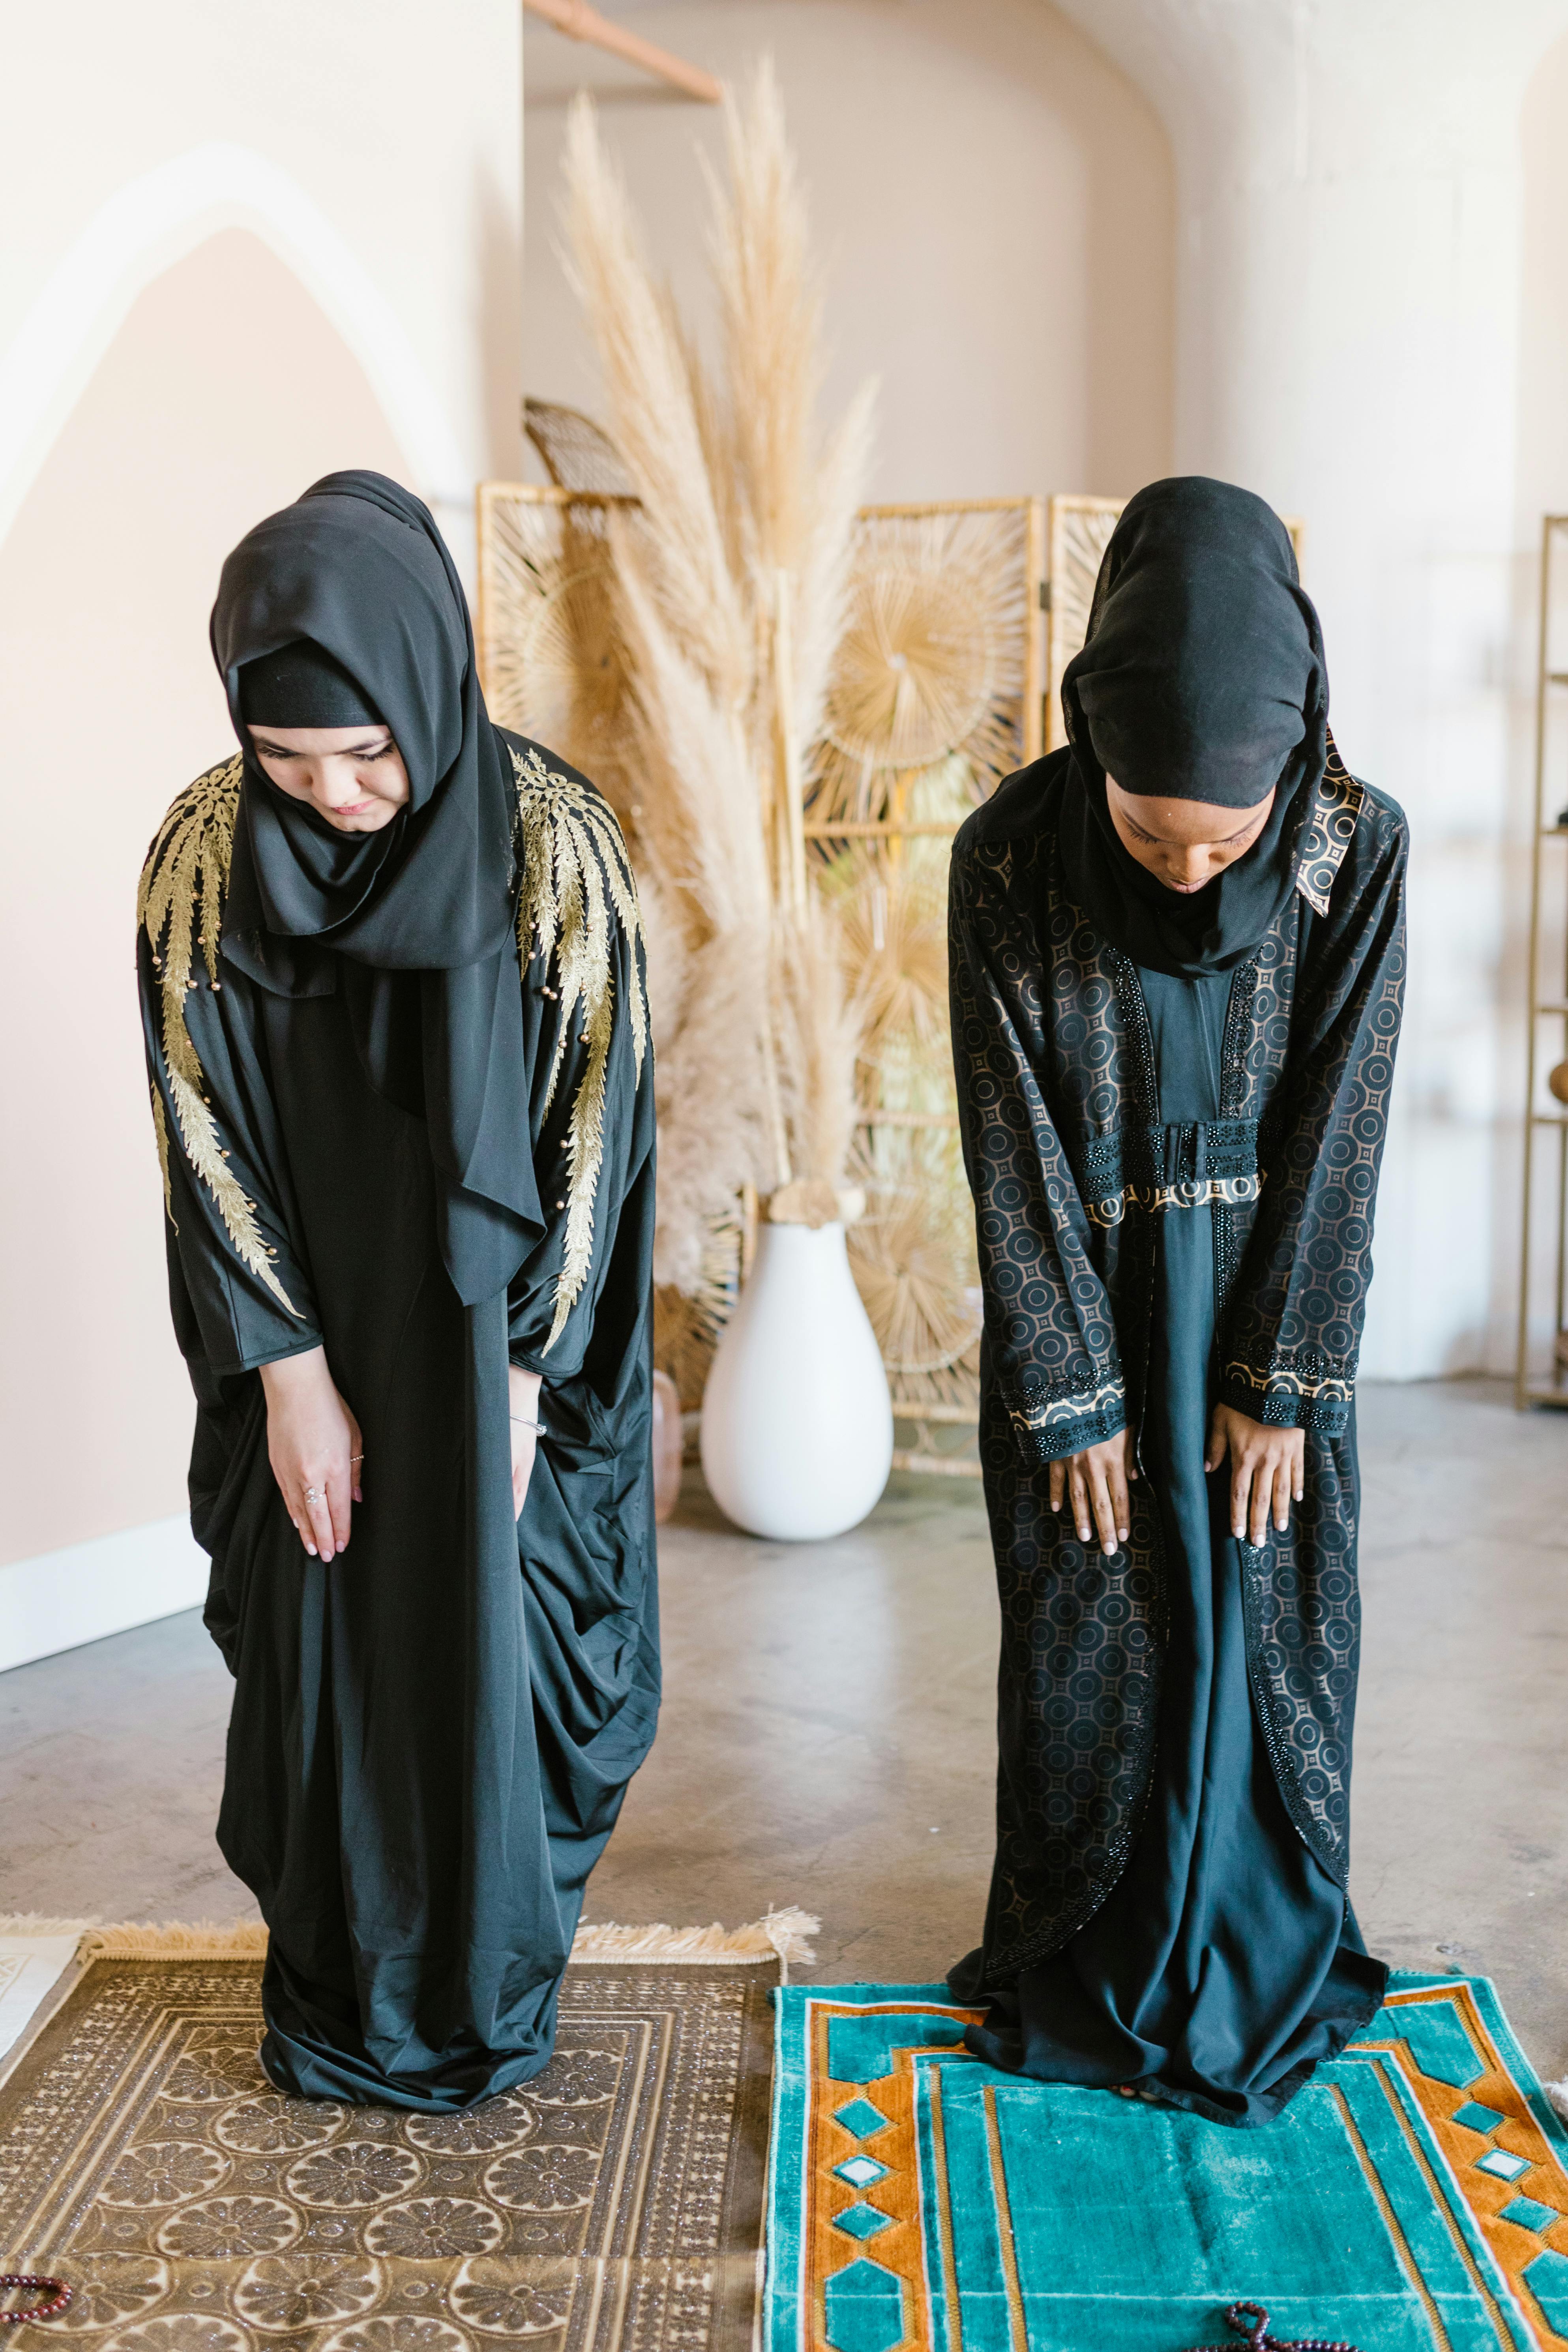 ownwomen wearing black hijab and bowing down